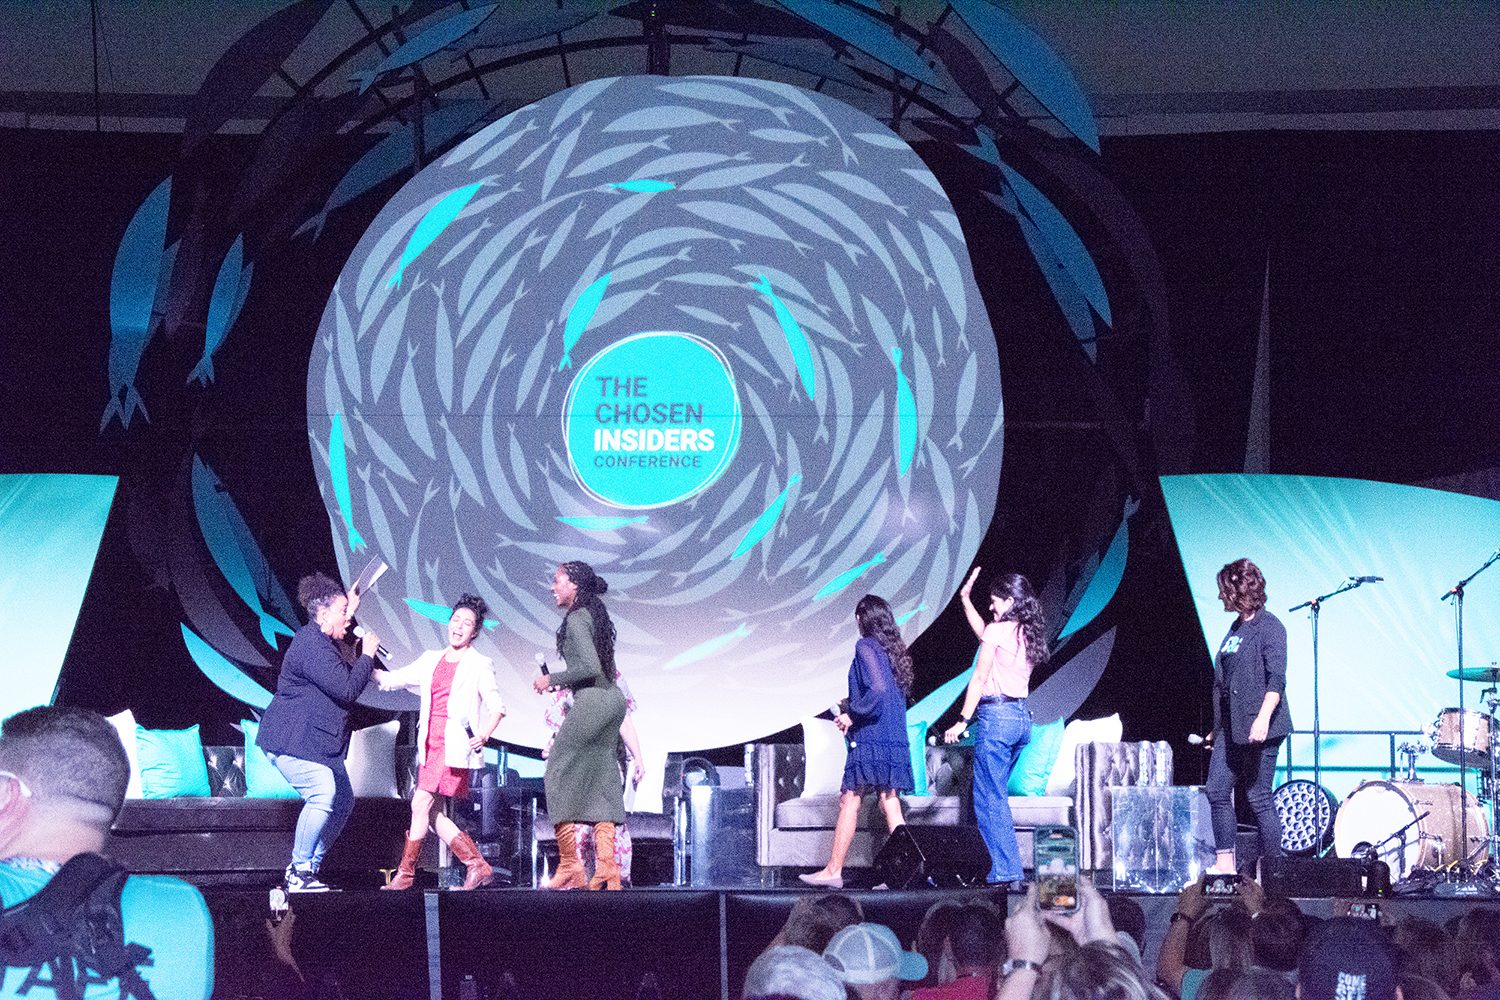 Panelists join together on stage during a presentation at ÒThe Chosen Insiders Conference.Ó Photo courtesy of BeLynn Hollers